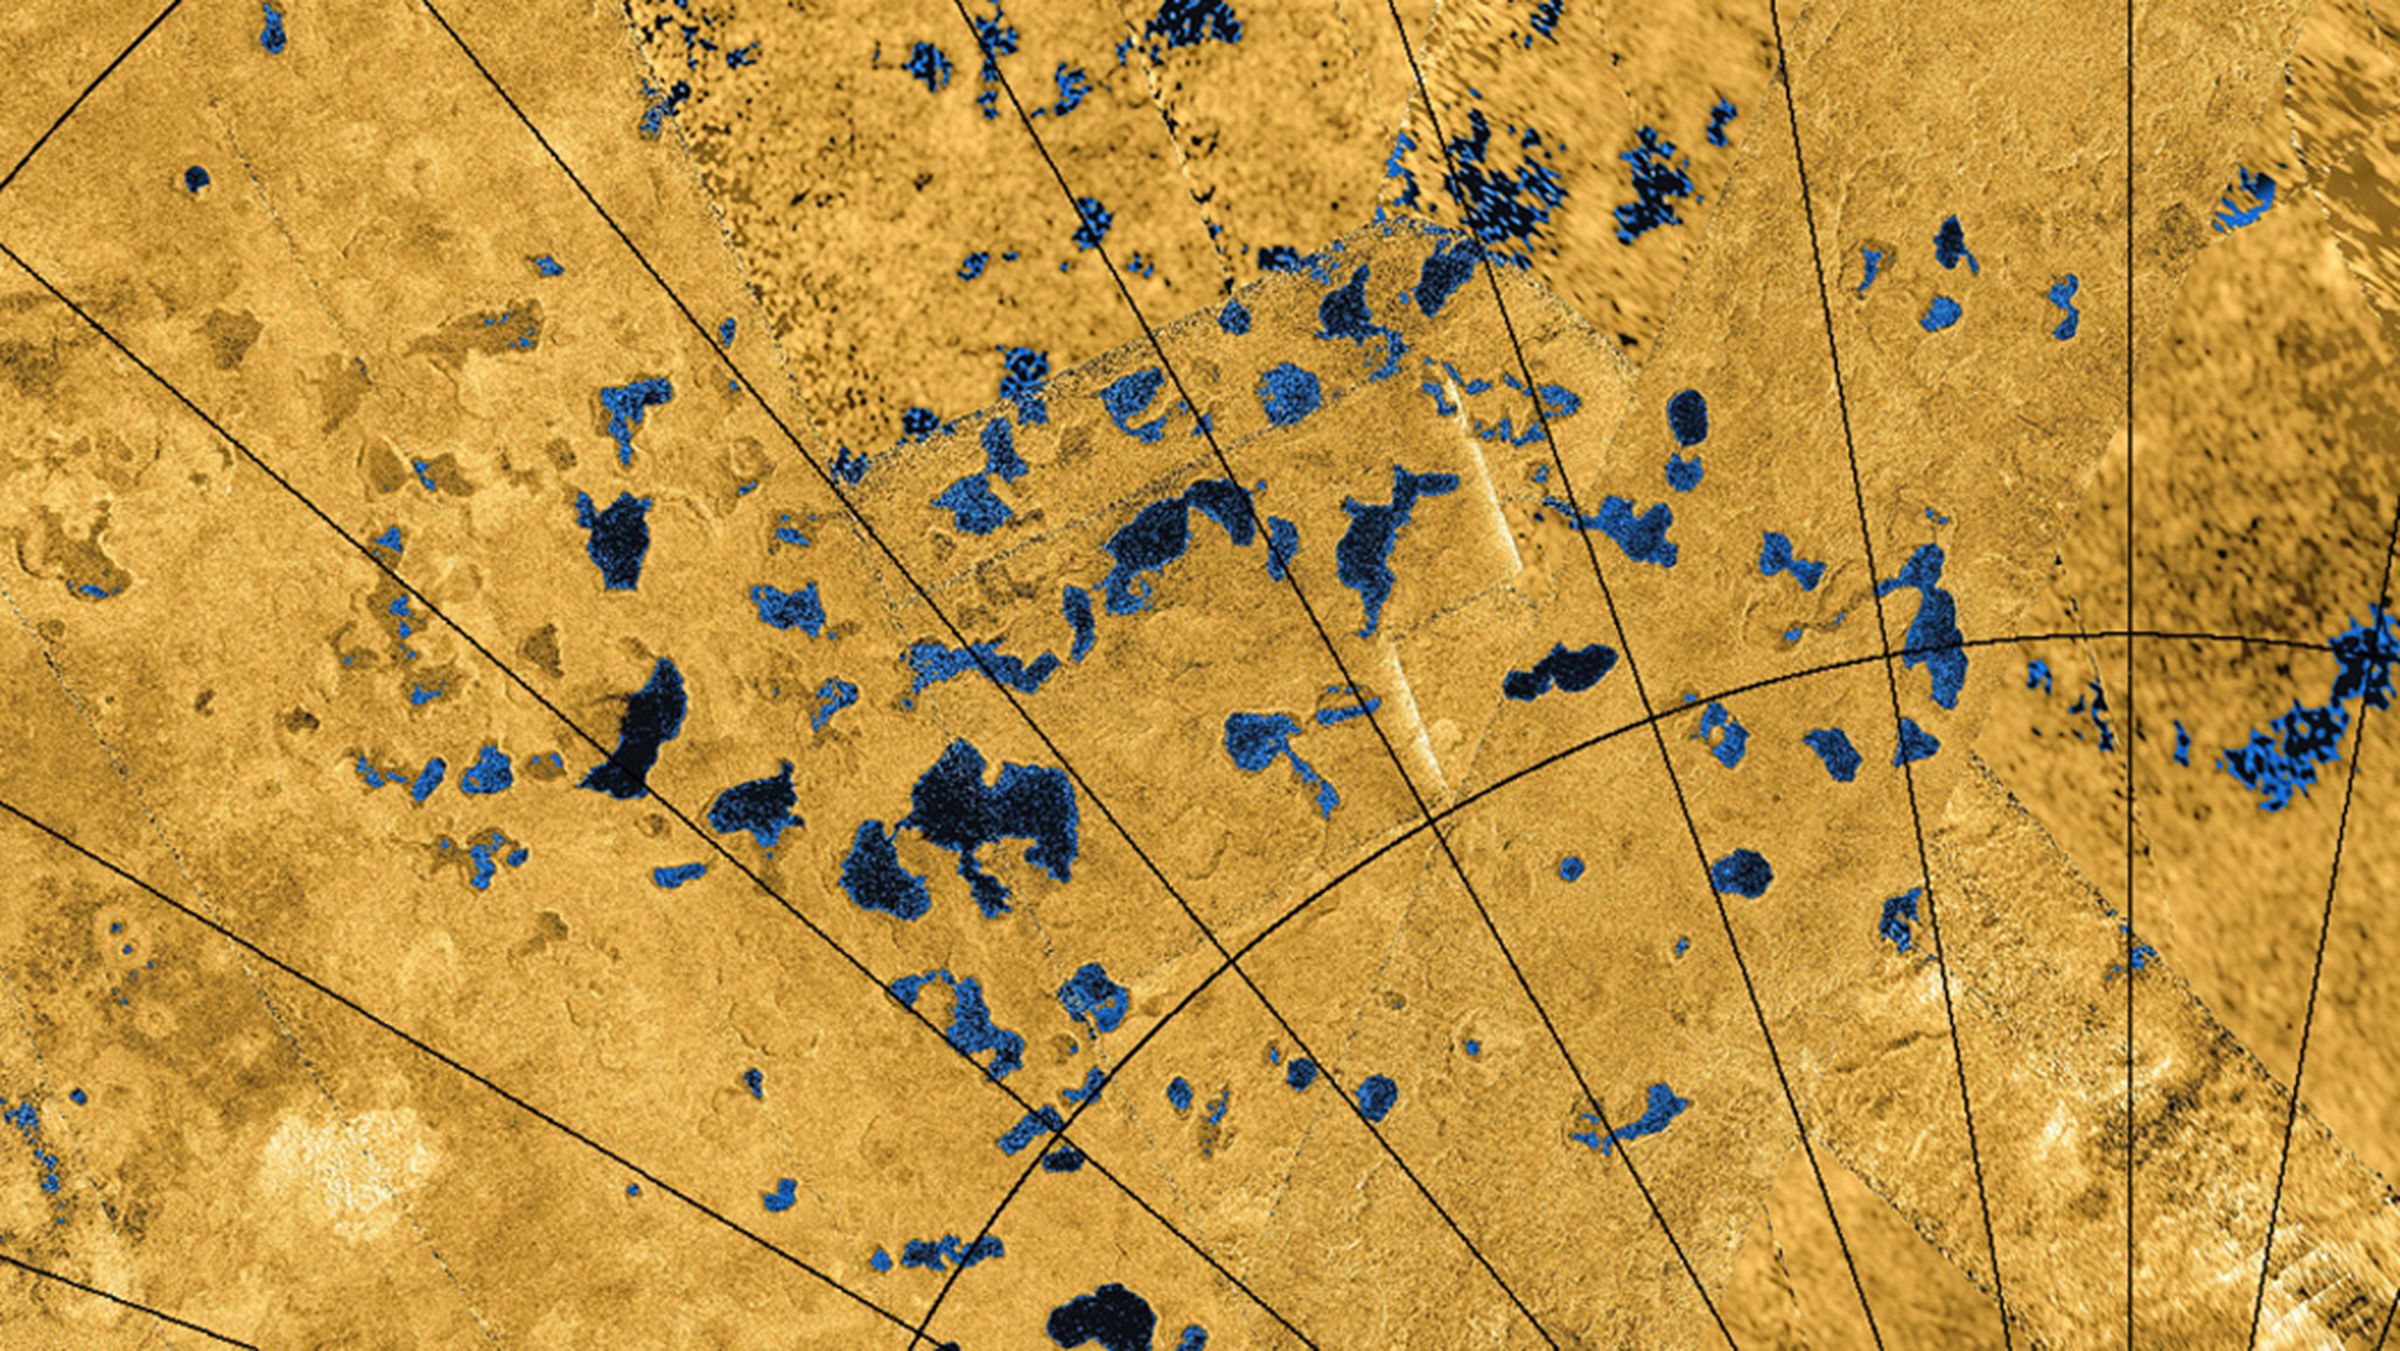 Titan’s methane lakes, seen in radar images from Cassini.